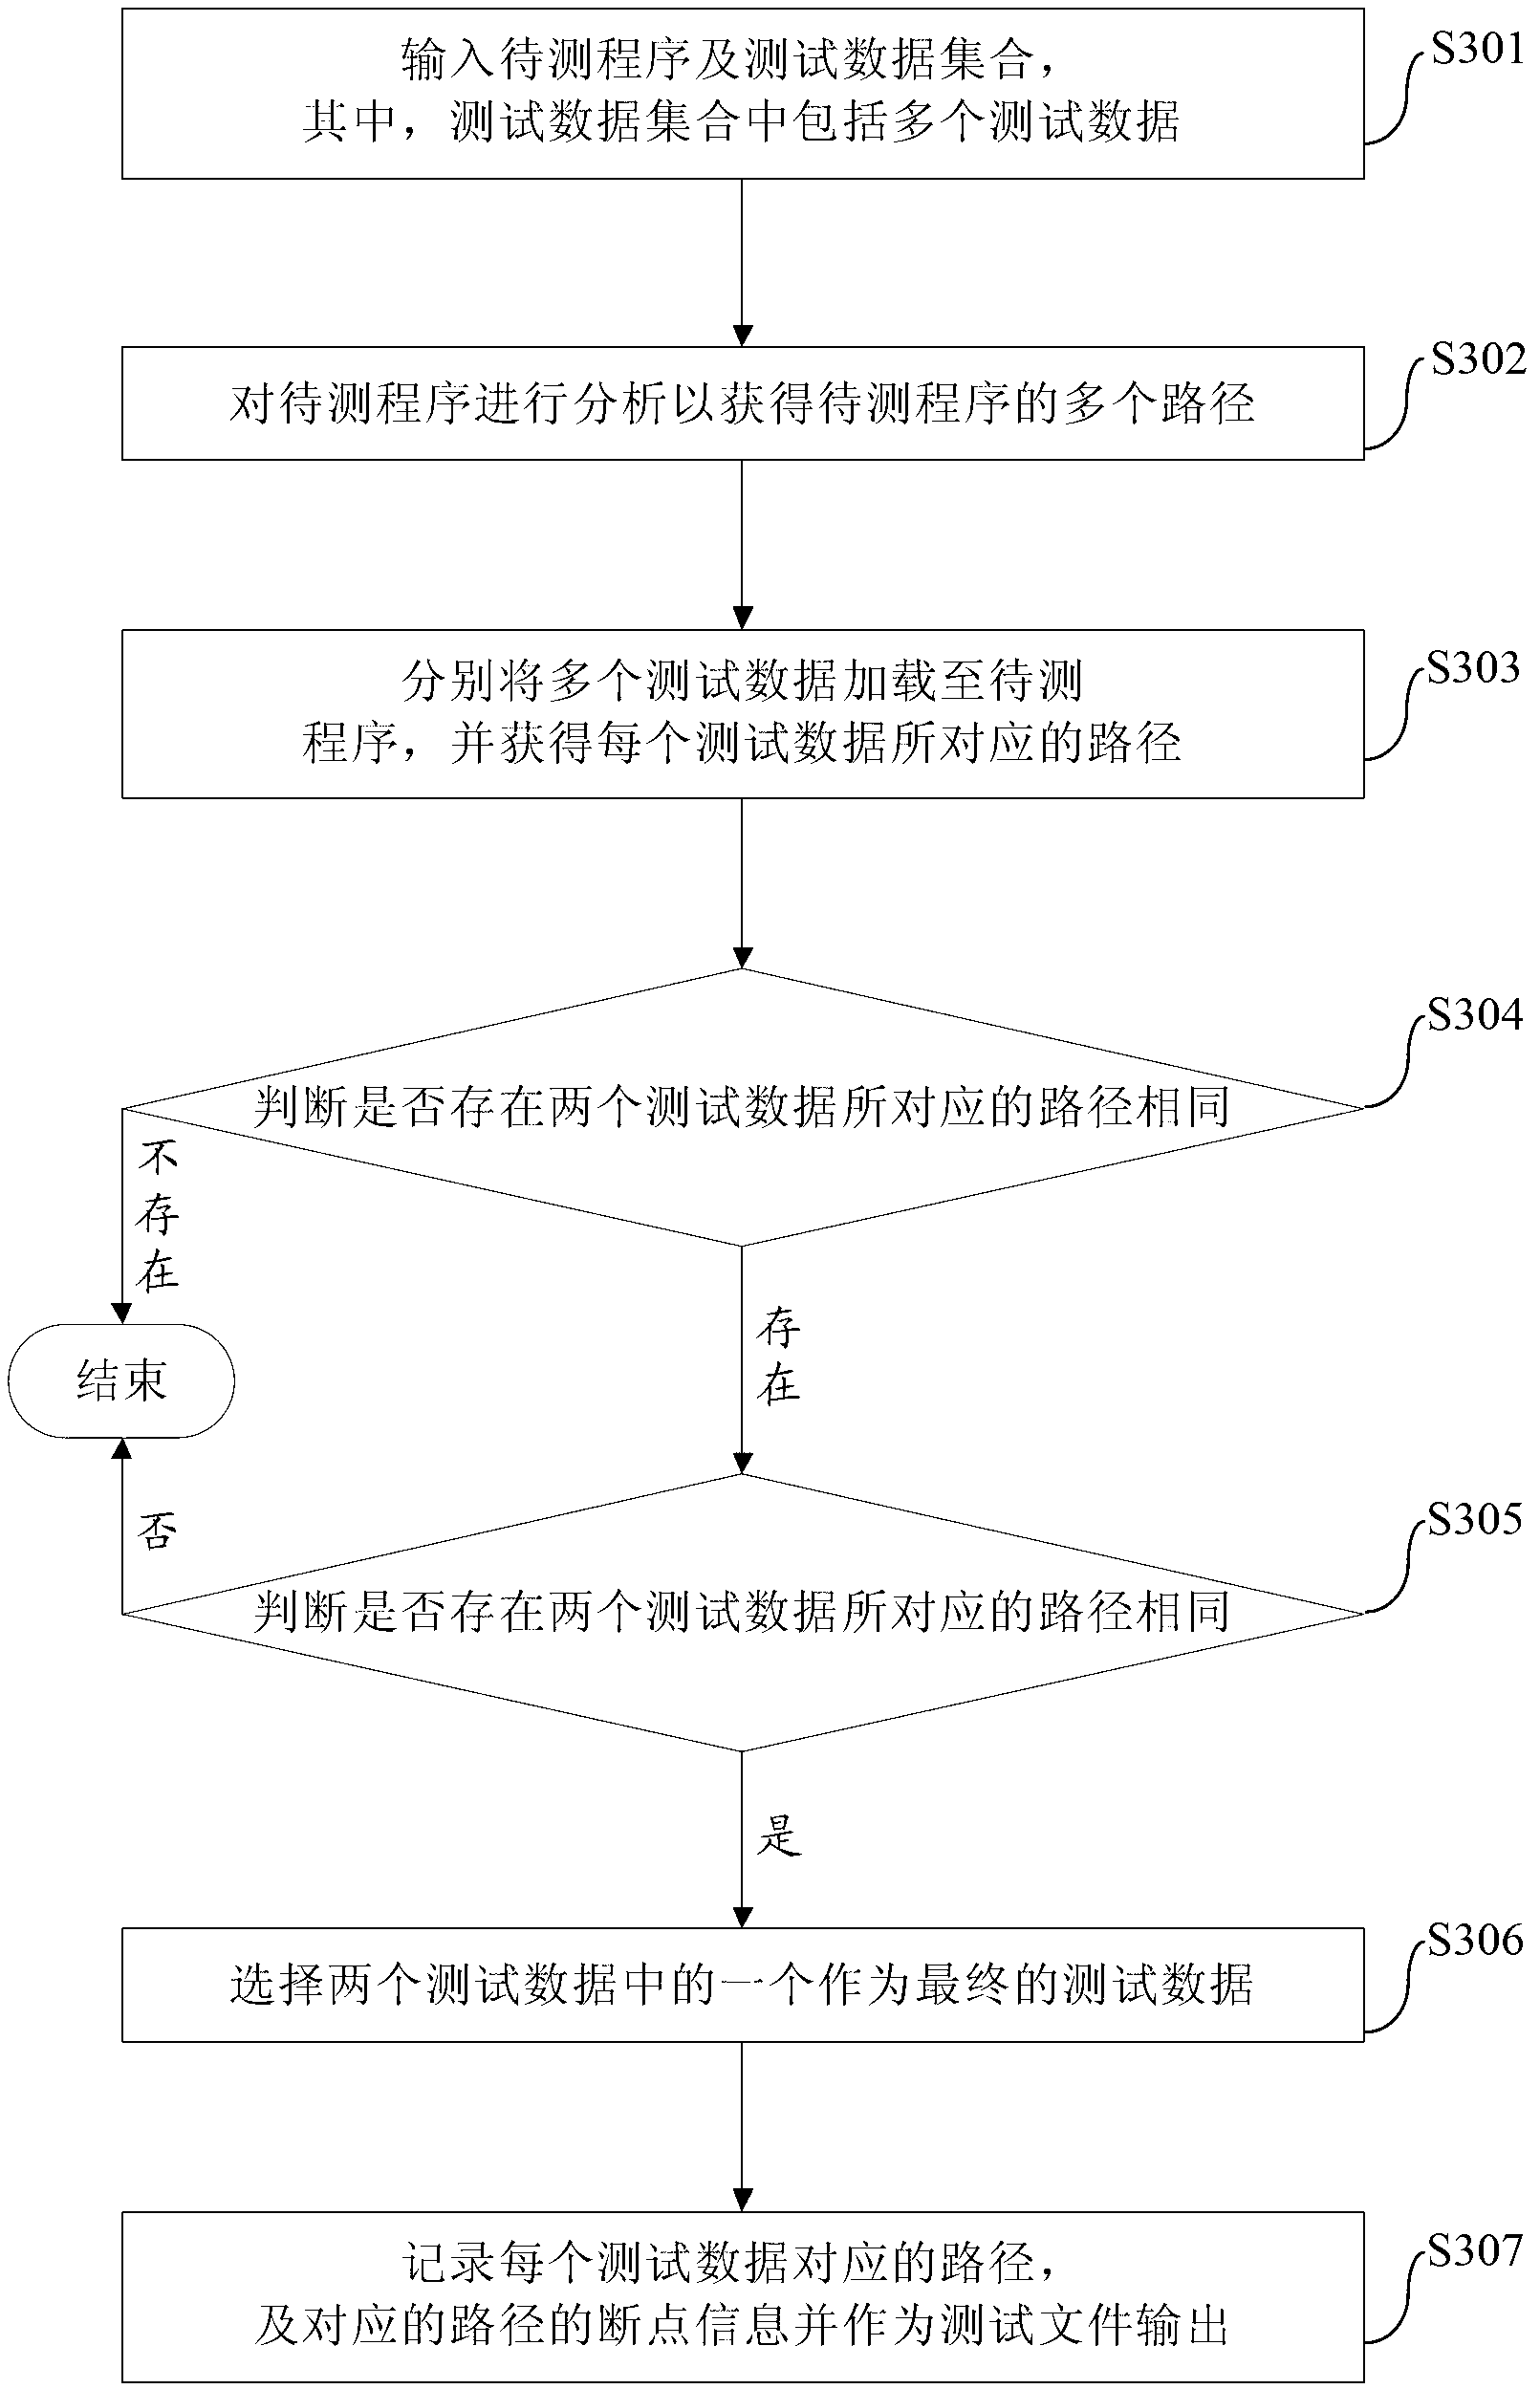 Screening method and device of test data